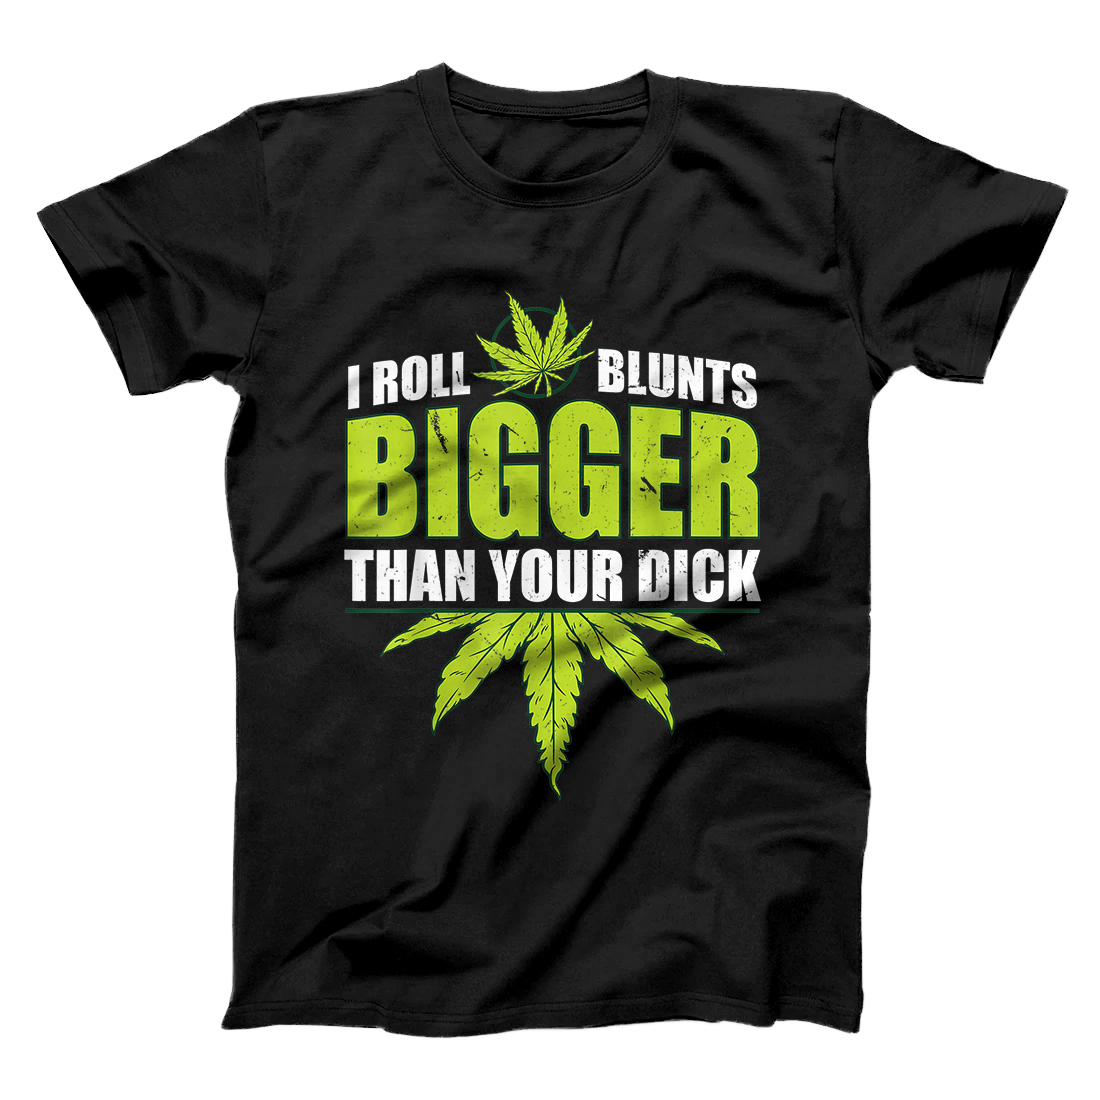 Personalized I Roll Blunts Bigger than Your Dick T-Shirt